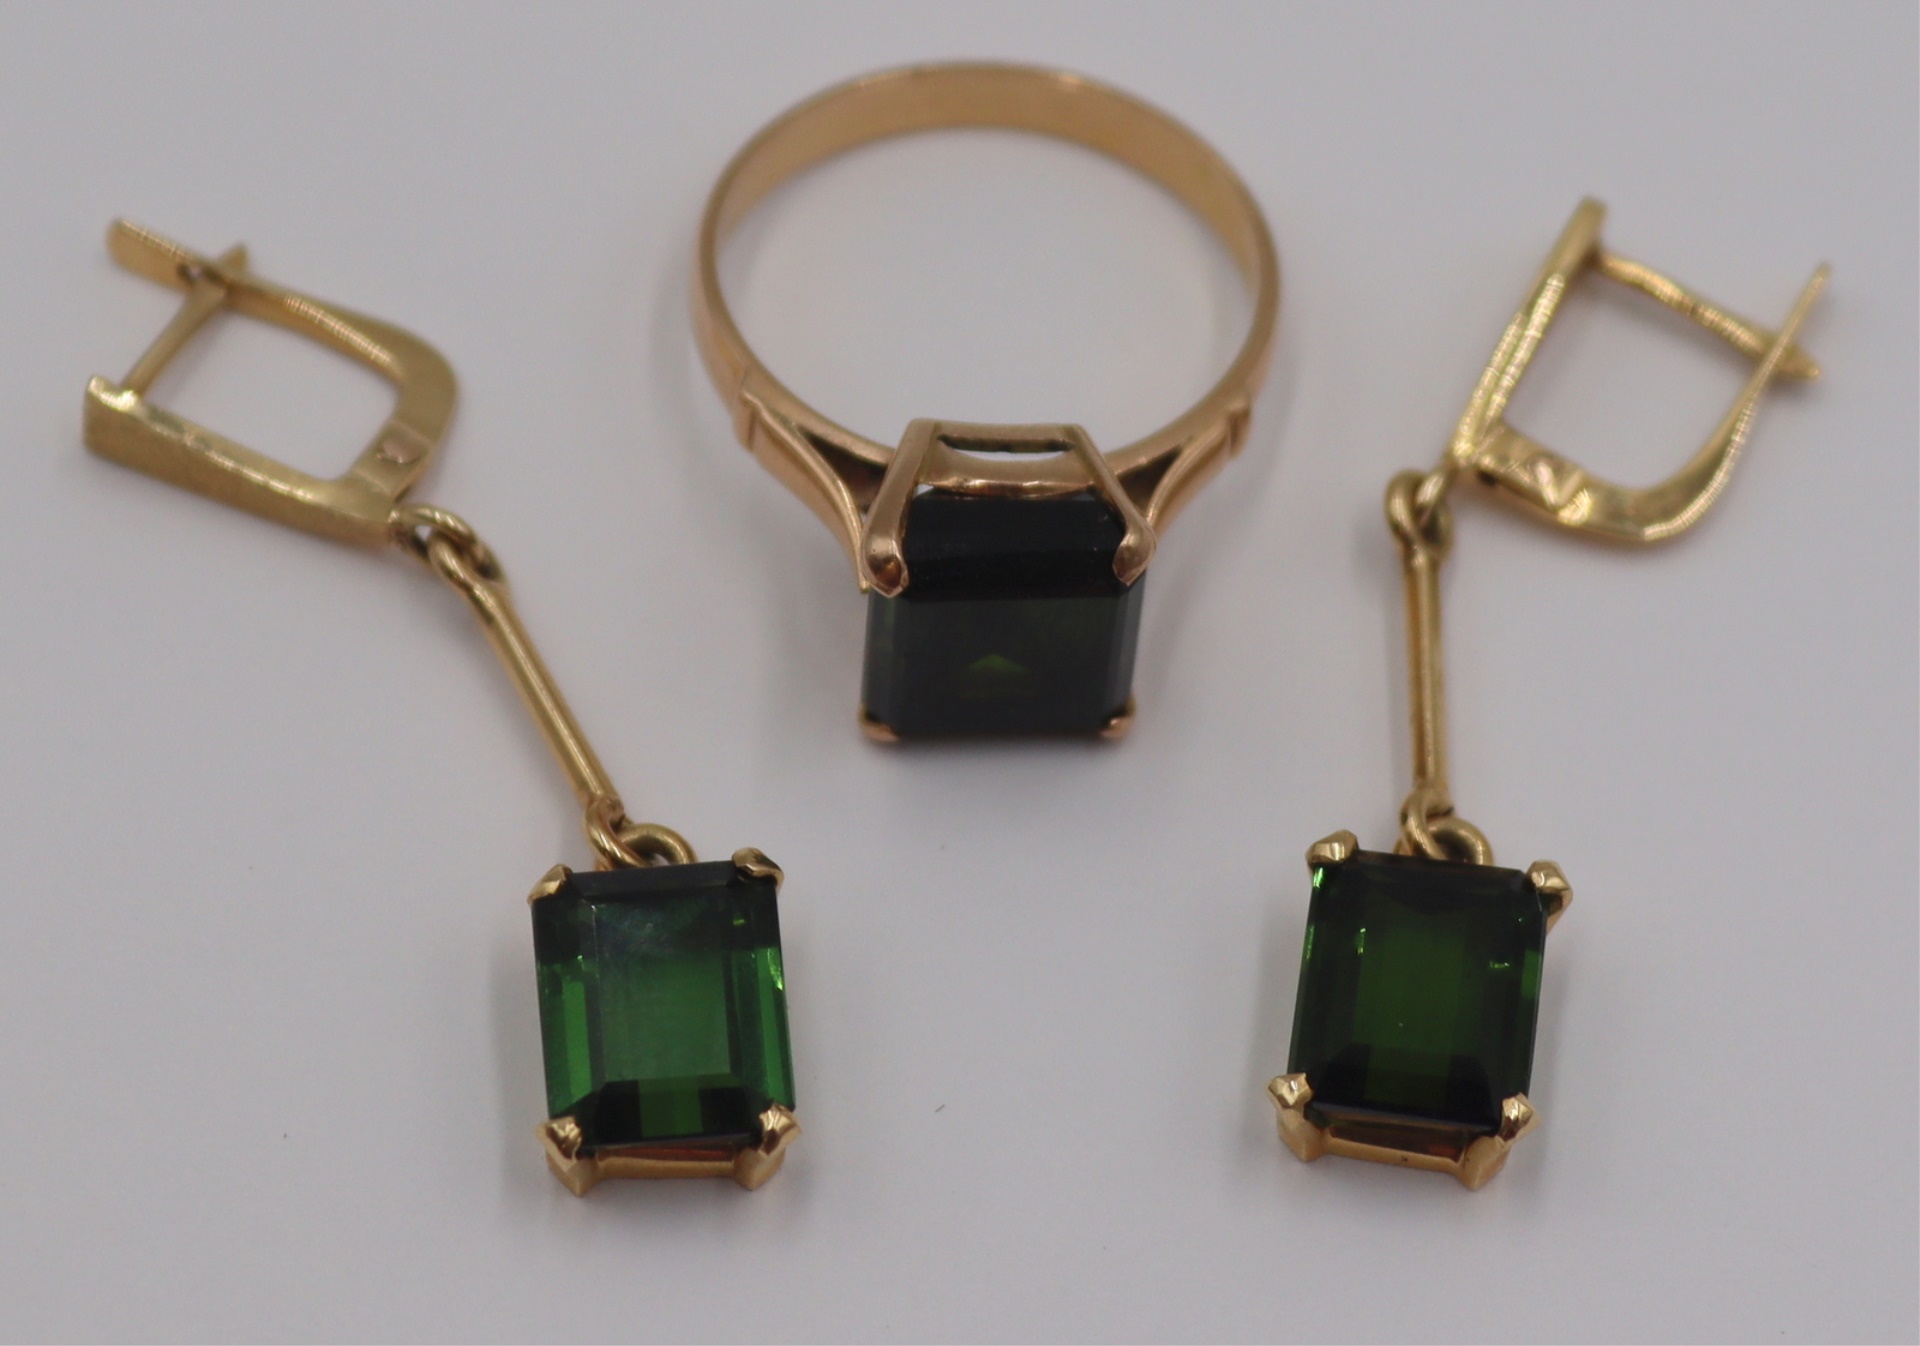 JEWELRY. 14KT GOLD AND COLORED